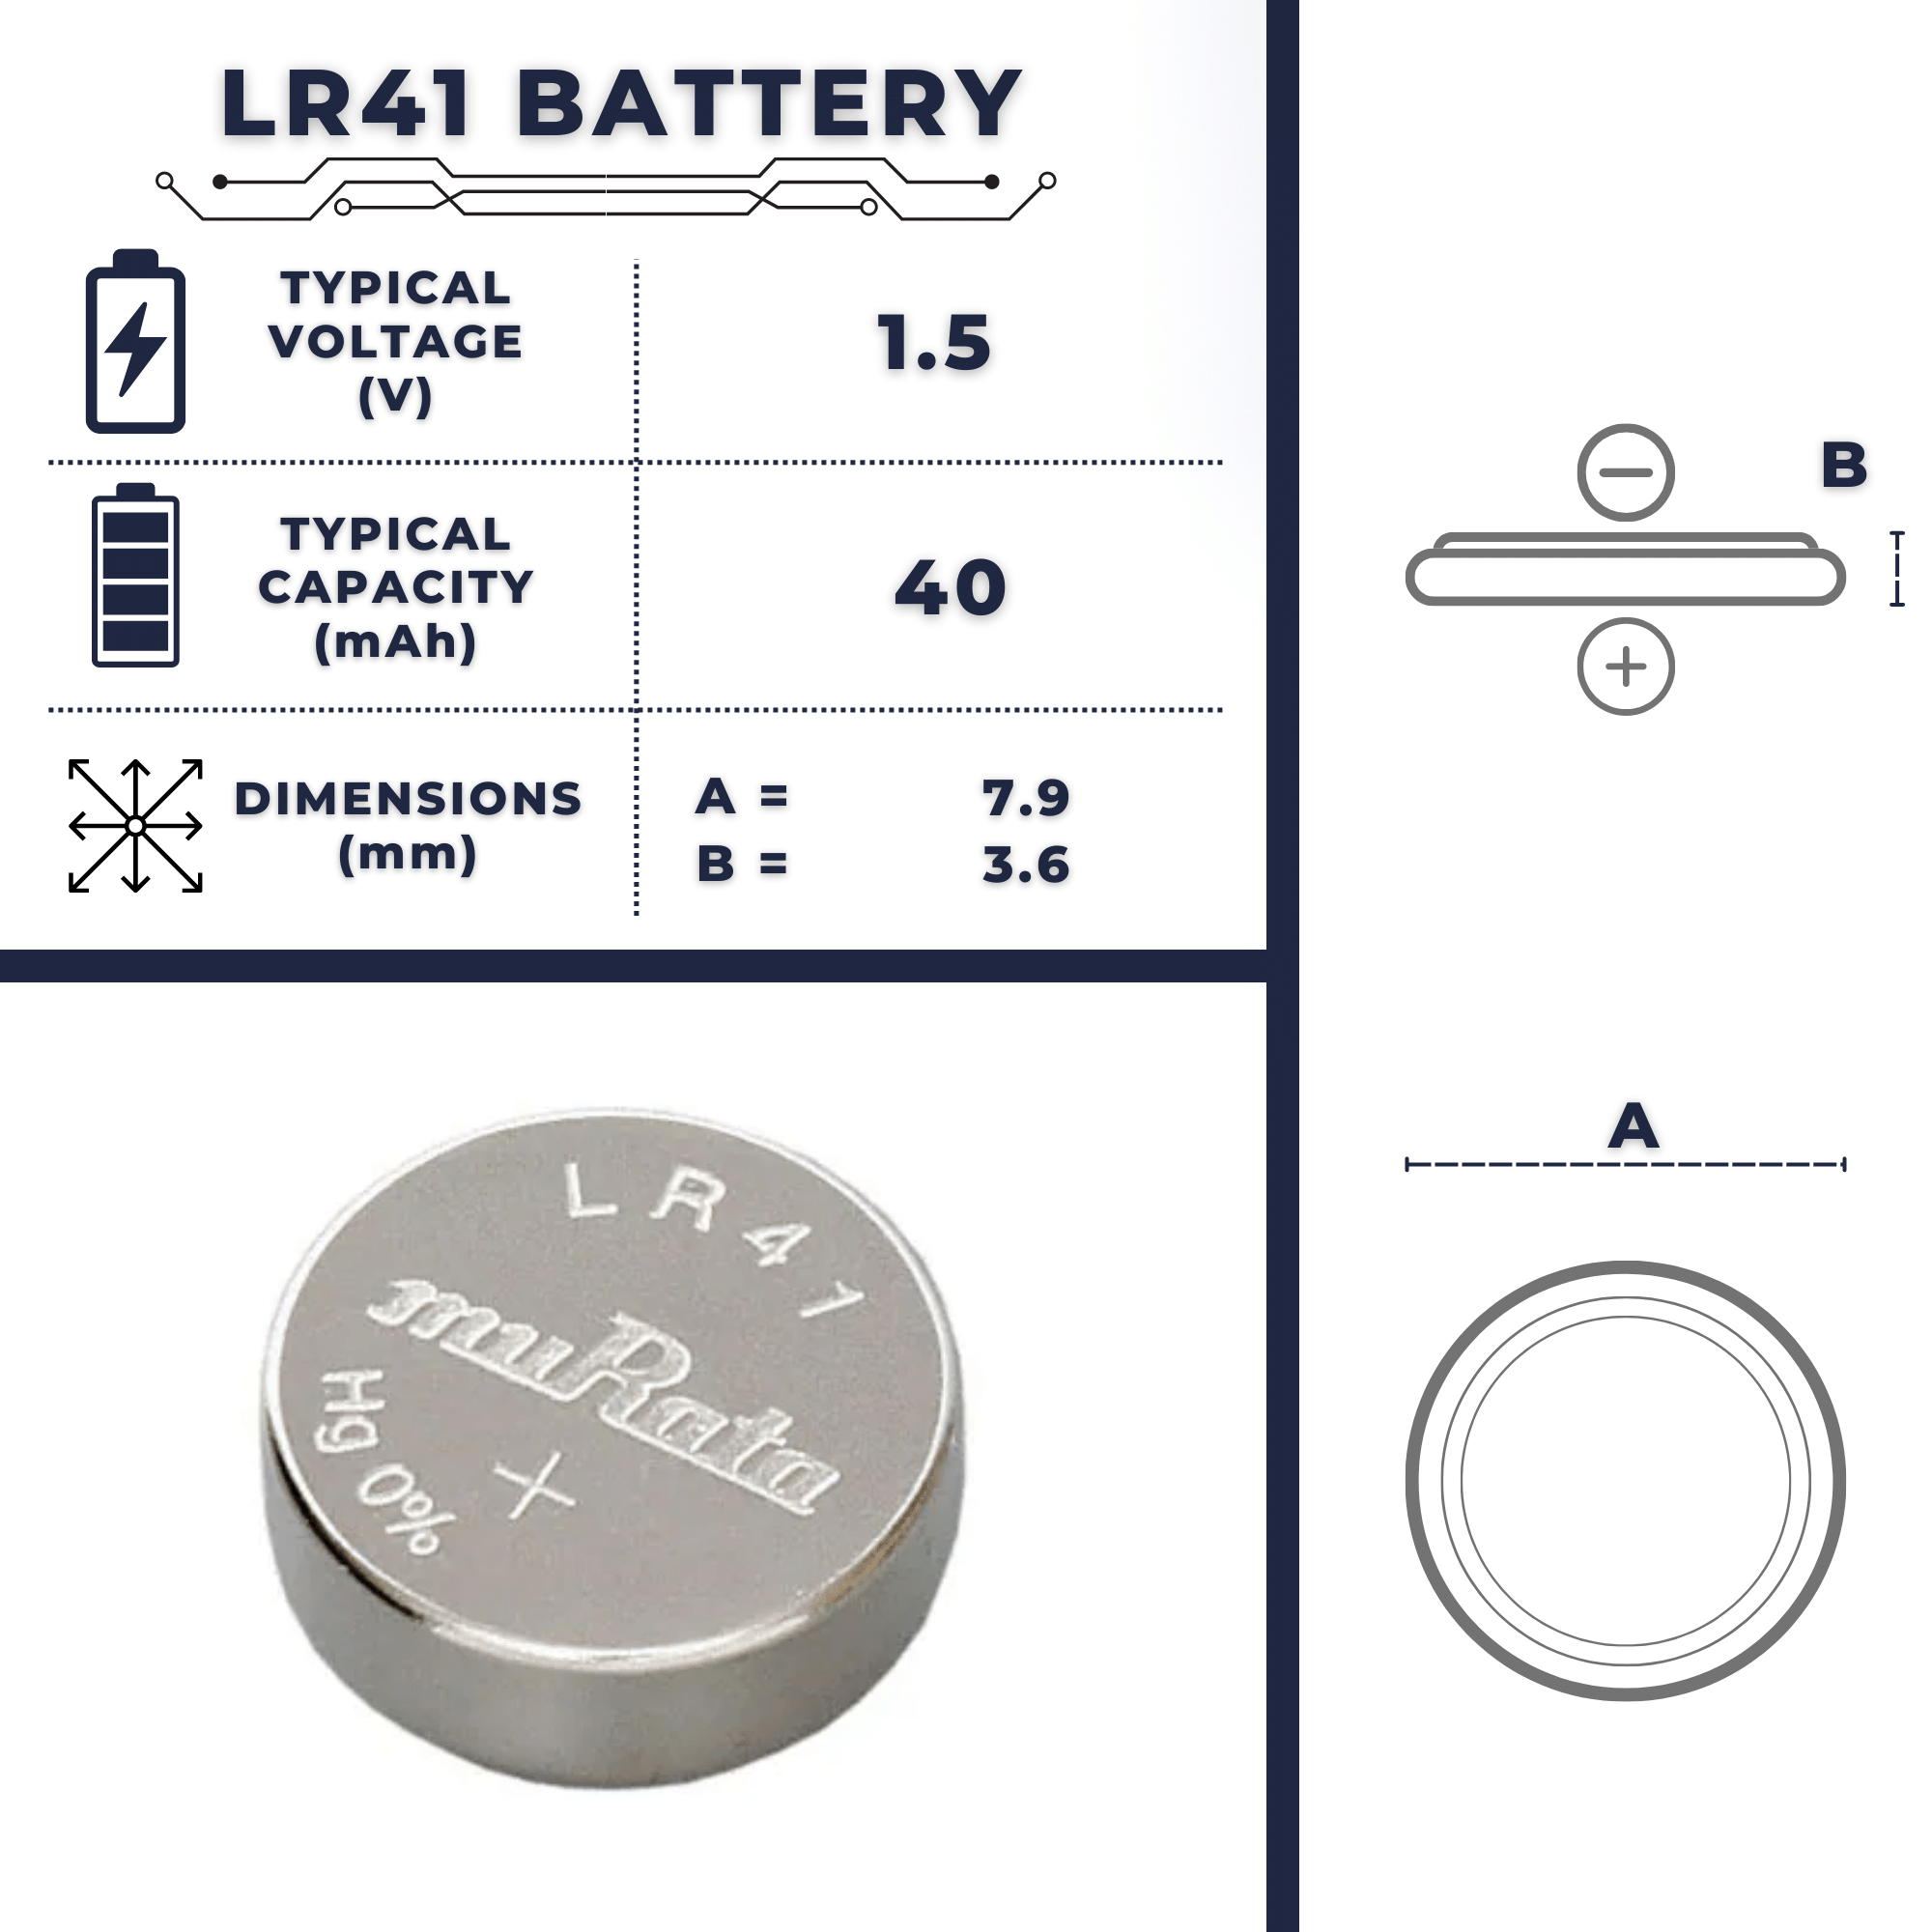 LR41 Battery Specifications & Equivalent: A Comprehensive Guide